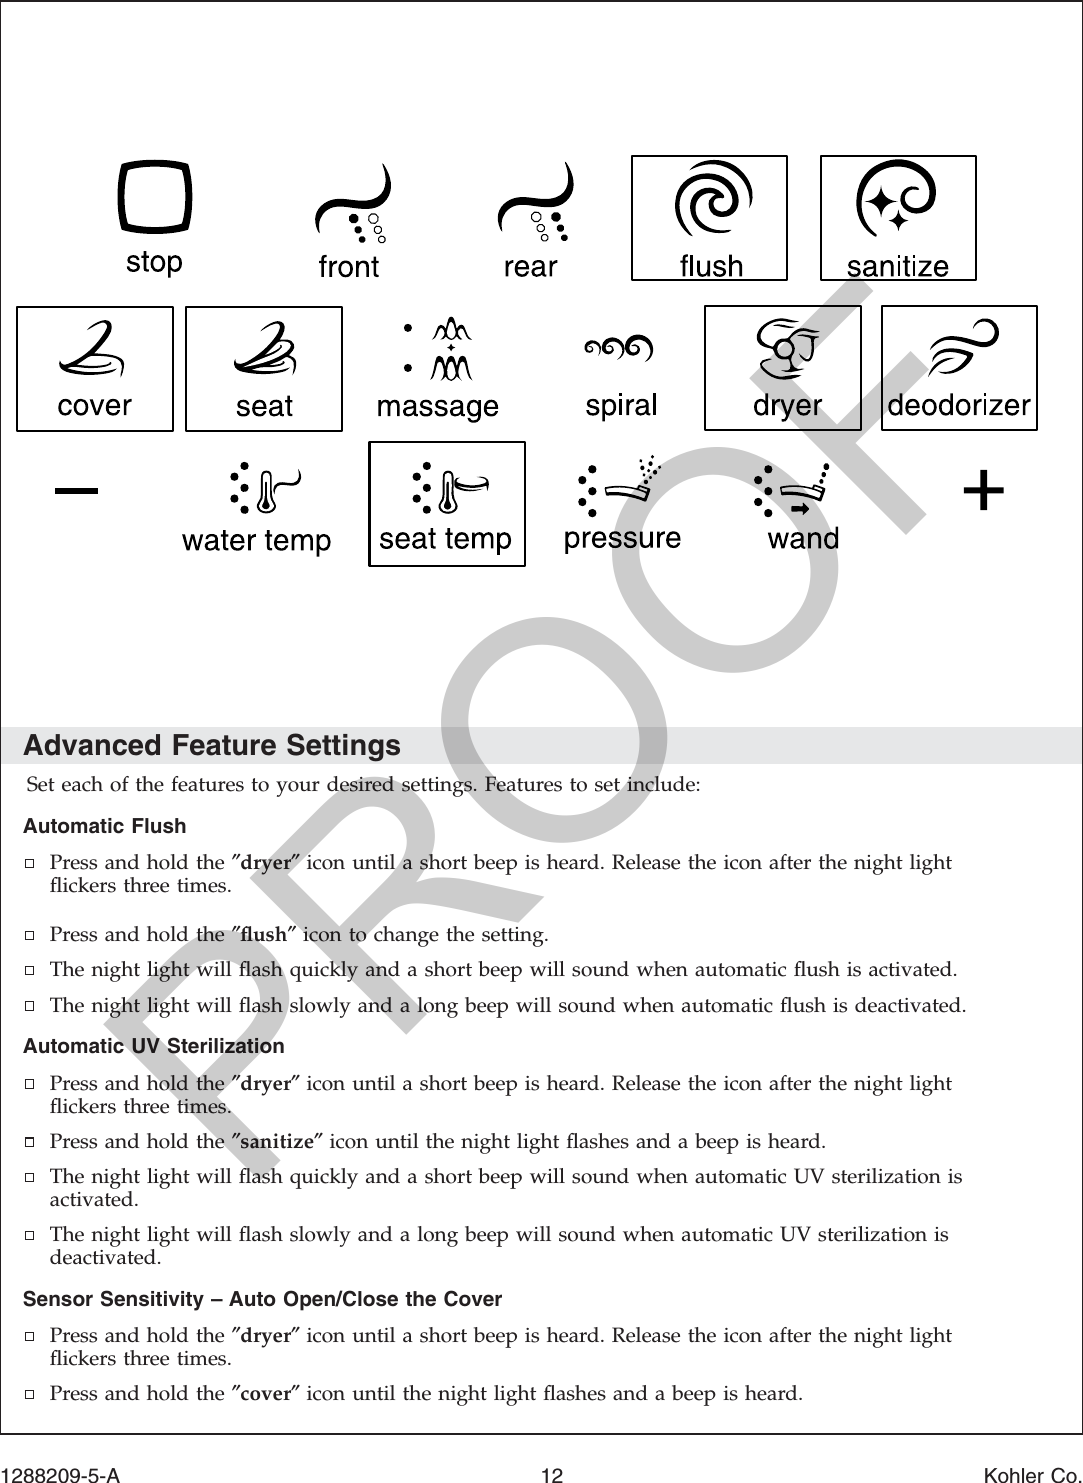 Advanced Feature SettingsSet each of the features to your desired settings. Features to set include:Automatic FlushPress and hold the ″dryer″icon until a short beep is heard. Release the icon after the night lightﬂickers three times.Press and hold the ″ﬂush″icon to change the setting.The night light will ﬂash quickly and a short beep will sound when automatic ﬂush is activated.The night light will ﬂash slowly and a long beep will sound when automatic ﬂush is deactivated.Automatic UV SterilizationPress and hold the ″dryer″icon until a short beep is heard. Release the icon after the night lightﬂickers three times.Press and hold the ″sanitize″icon until the night light ﬂashes and a beep is heard.The night light will ﬂash quickly and a short beep will sound when automatic UV sterilization isactivated.The night light will ﬂash slowly and a long beep will sound when automatic UV sterilization isdeactivated.Sensor Sensitivity – Auto Open/Close the CoverPress and hold the ″dryer″icon until a short beep is heard. Release the icon after the night lightﬂickers three times.Press and hold the ″cover″icon until the night light ﬂashes and a beep is heard.1288209-5-A 12 Kohler Co.PROOF